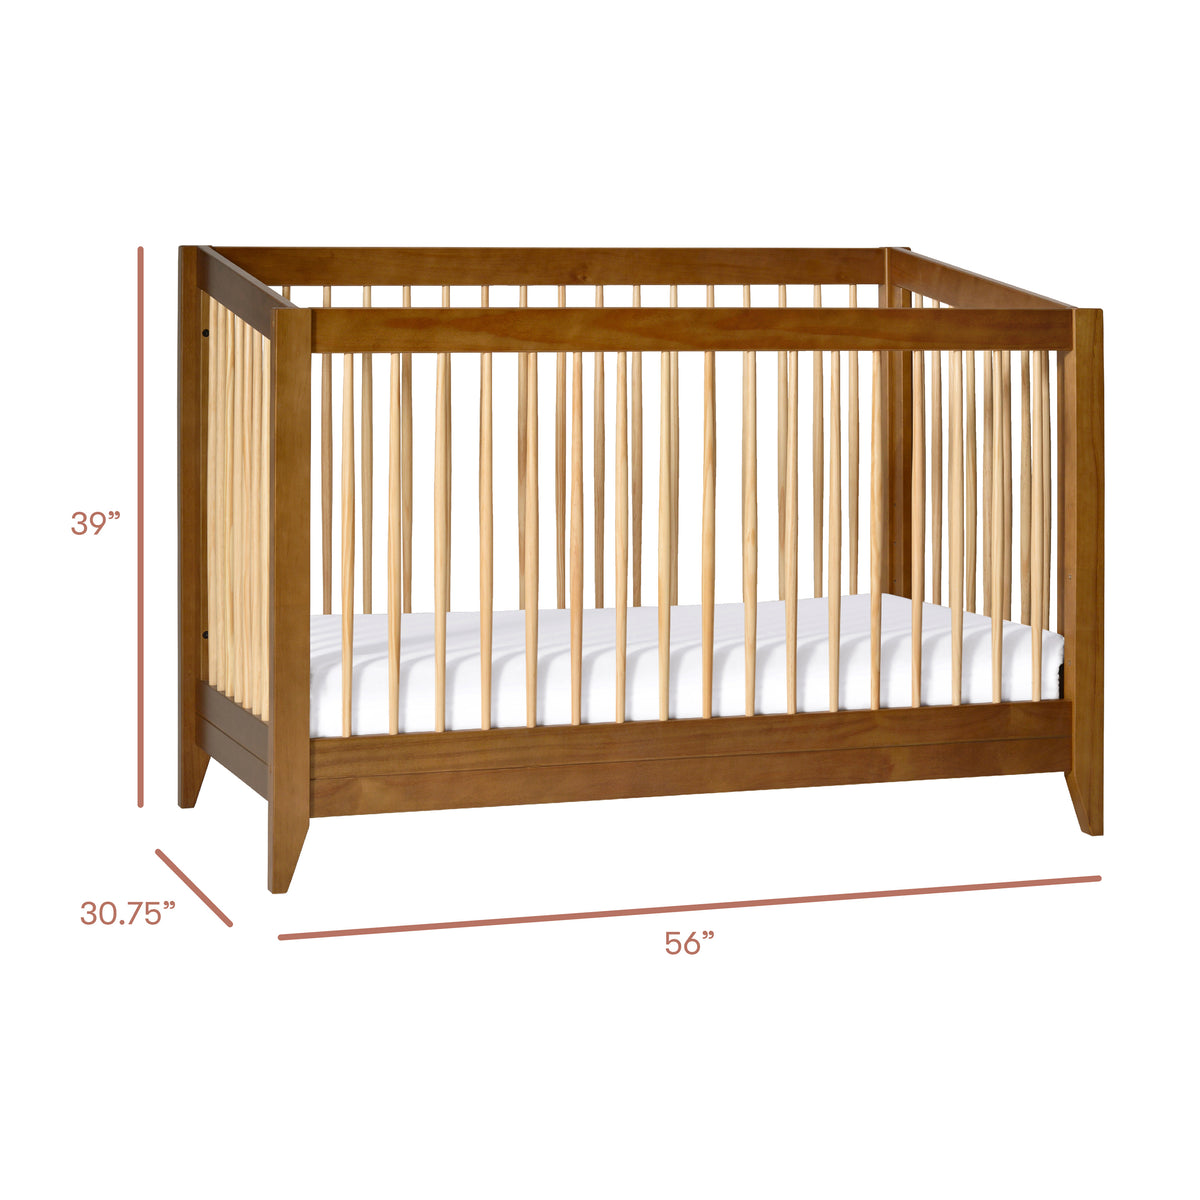 Sprout 4-in-1 Convertible Crib with Toddler Bed Conversion Kit - Chestnut/Natural